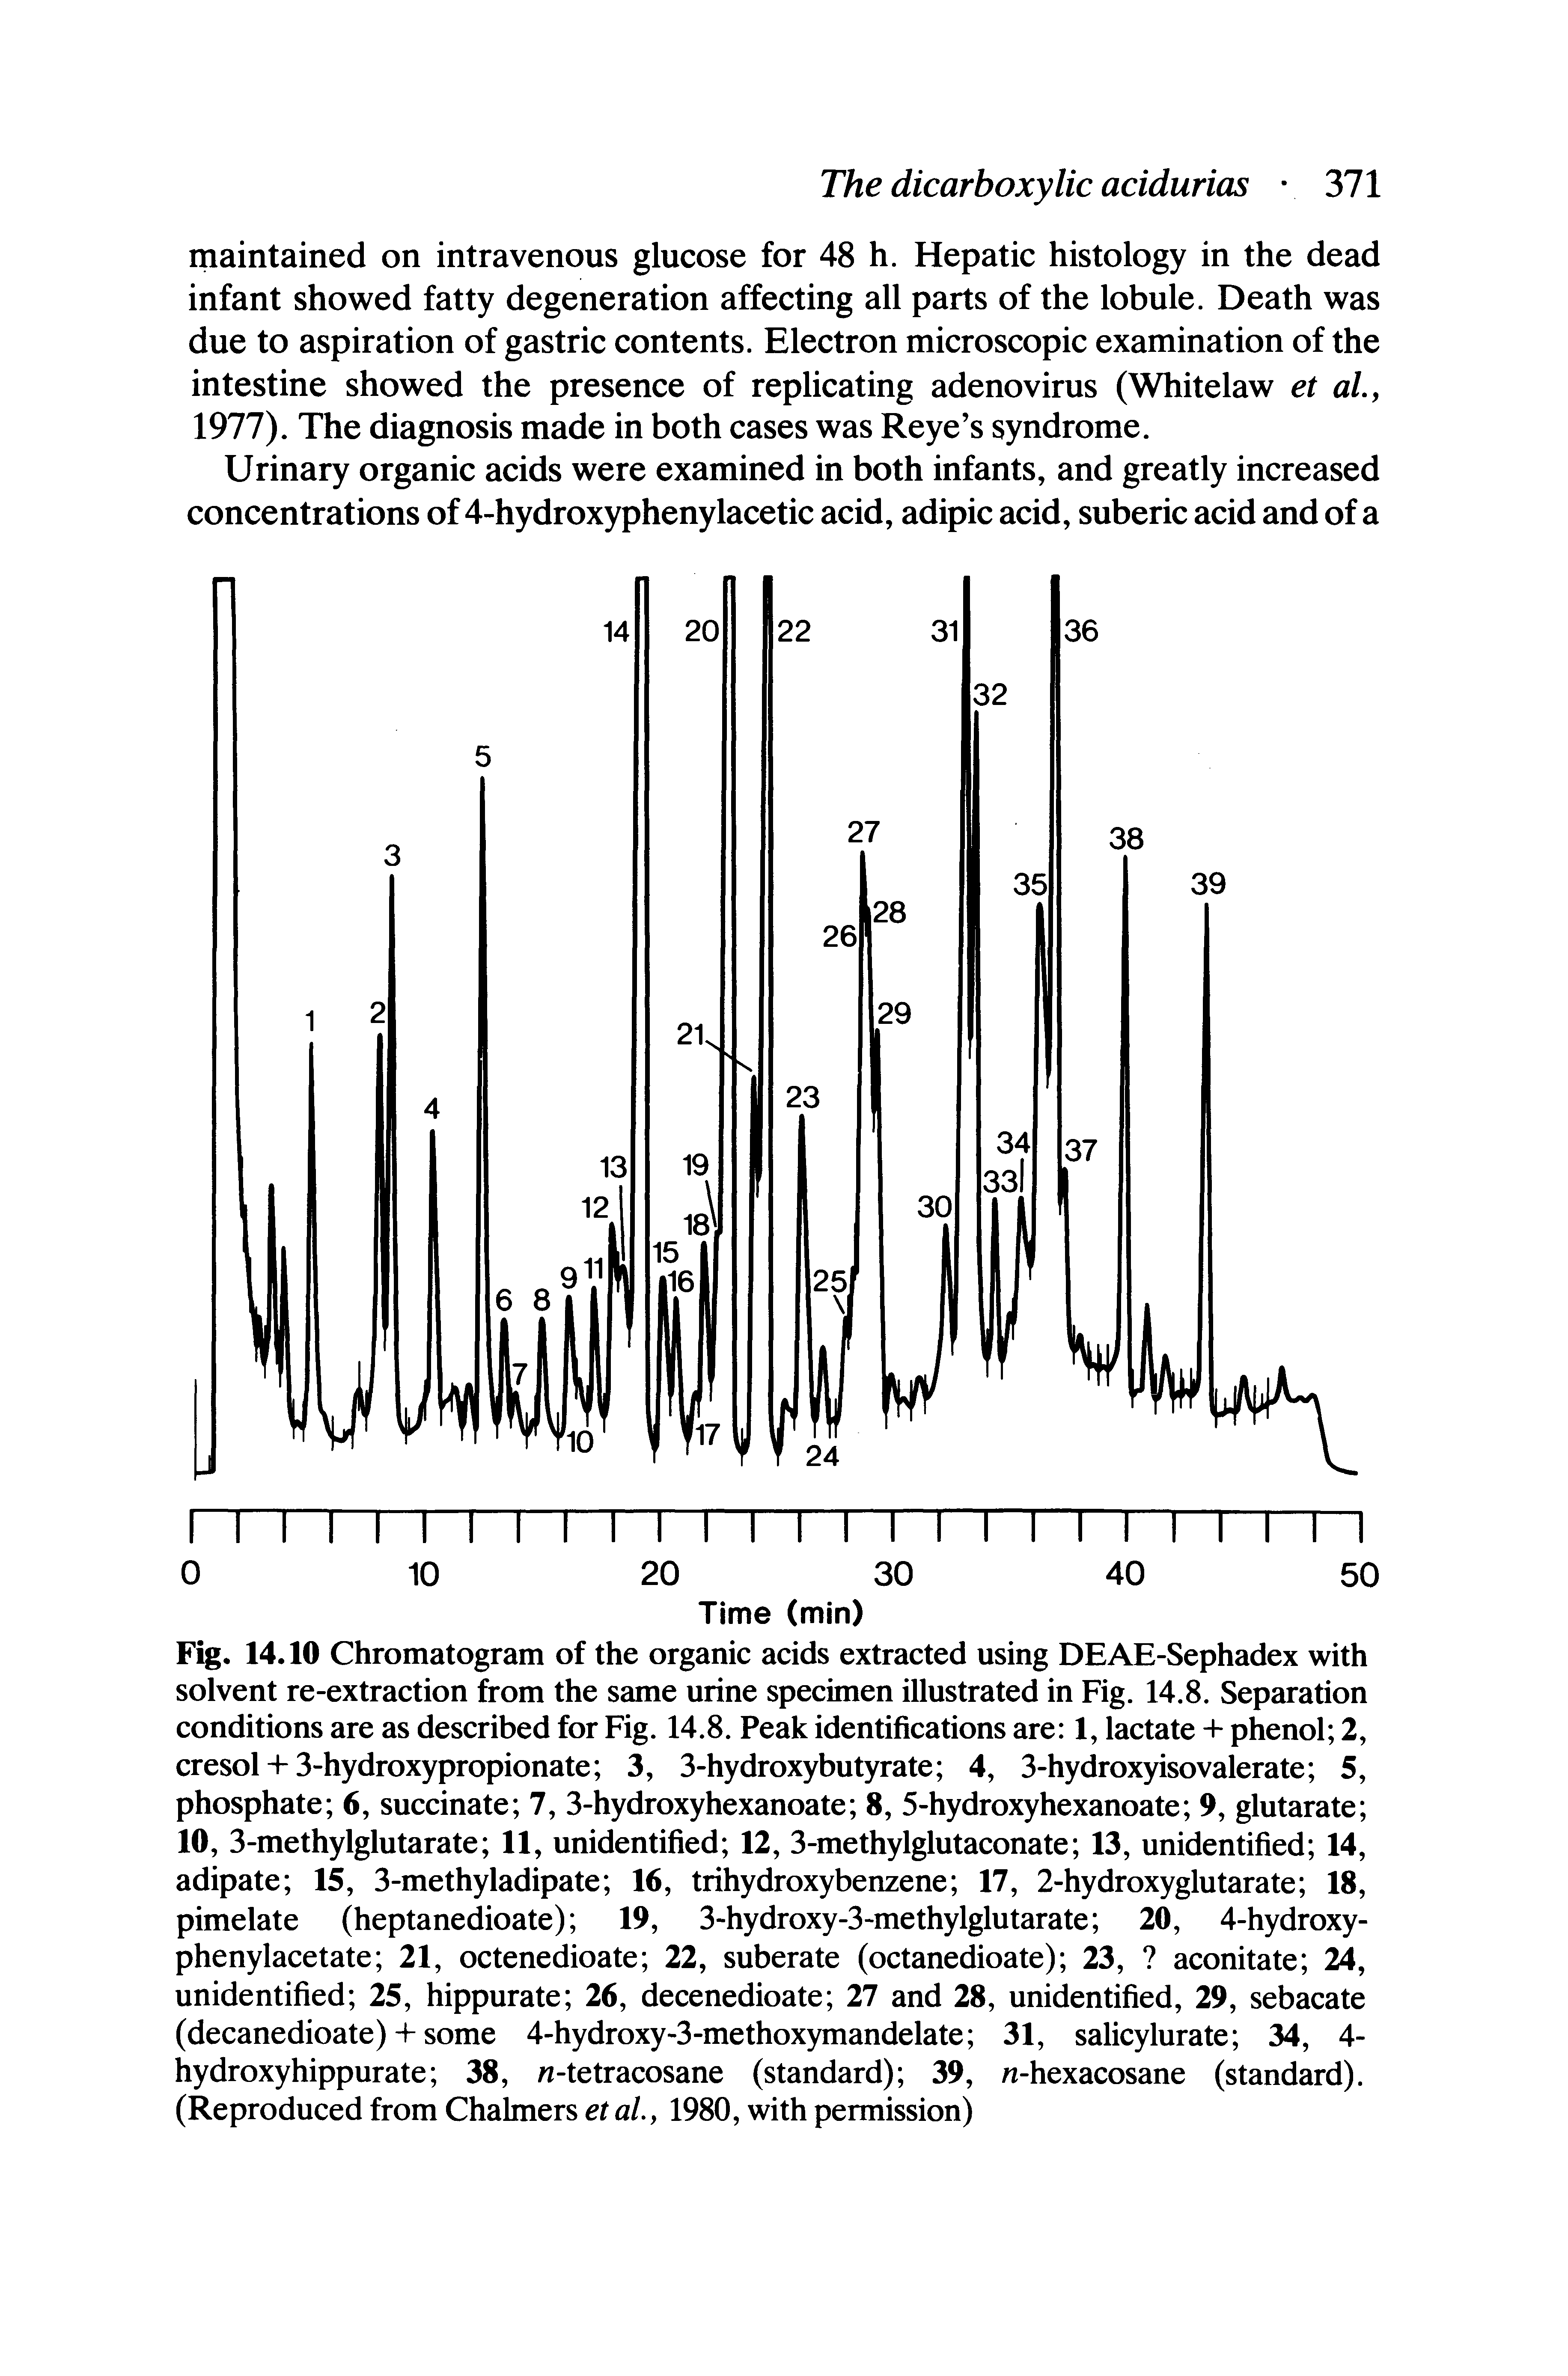 Fig. 14.10 Chromatogram of the organic acids extracted using DEAE-Sephadex with solvent re-extraction from the same urine specimen illustrated in Fig. 14.8. Separation conditions are as described for Fig. 14.8. Peak identifications are 1, lactate + phenol 2, cresol + 3-hydroxypropionate 3, 3-hydroxybutyrate 4, 3-hydroxyisovalerate 5, phosphate 6, succinate 7, 3-hydroxyhexanoate 8, 5-hydroxyhexanoate 9, glutarate 10, 3-methylglutarate 11, unidentified 12, 3-methylglutaconate 13, unidentified 14, adipate 15, 3-methyladipate 16, trihydroxybenzene 17, 2-hydroxyglutarate 18, pimelate (heptanedioate) 19, 3-hydroxy-3-methylglutarate 20, 4-hydroxy-...